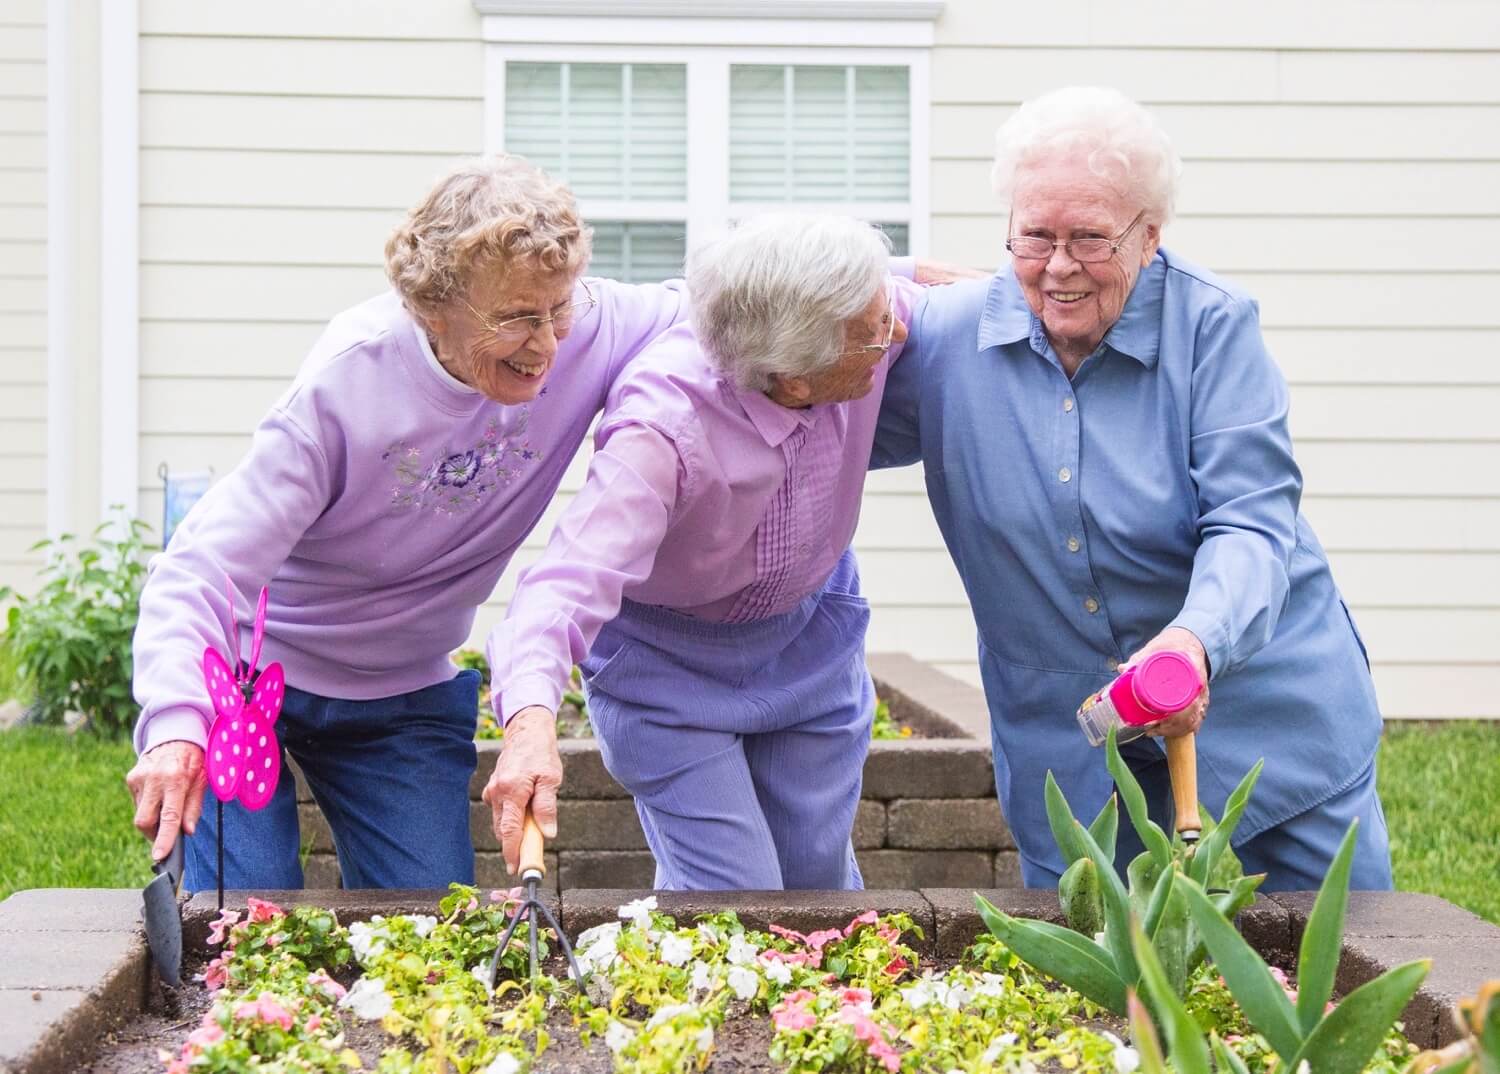 Shiloh-Group of residents gardening